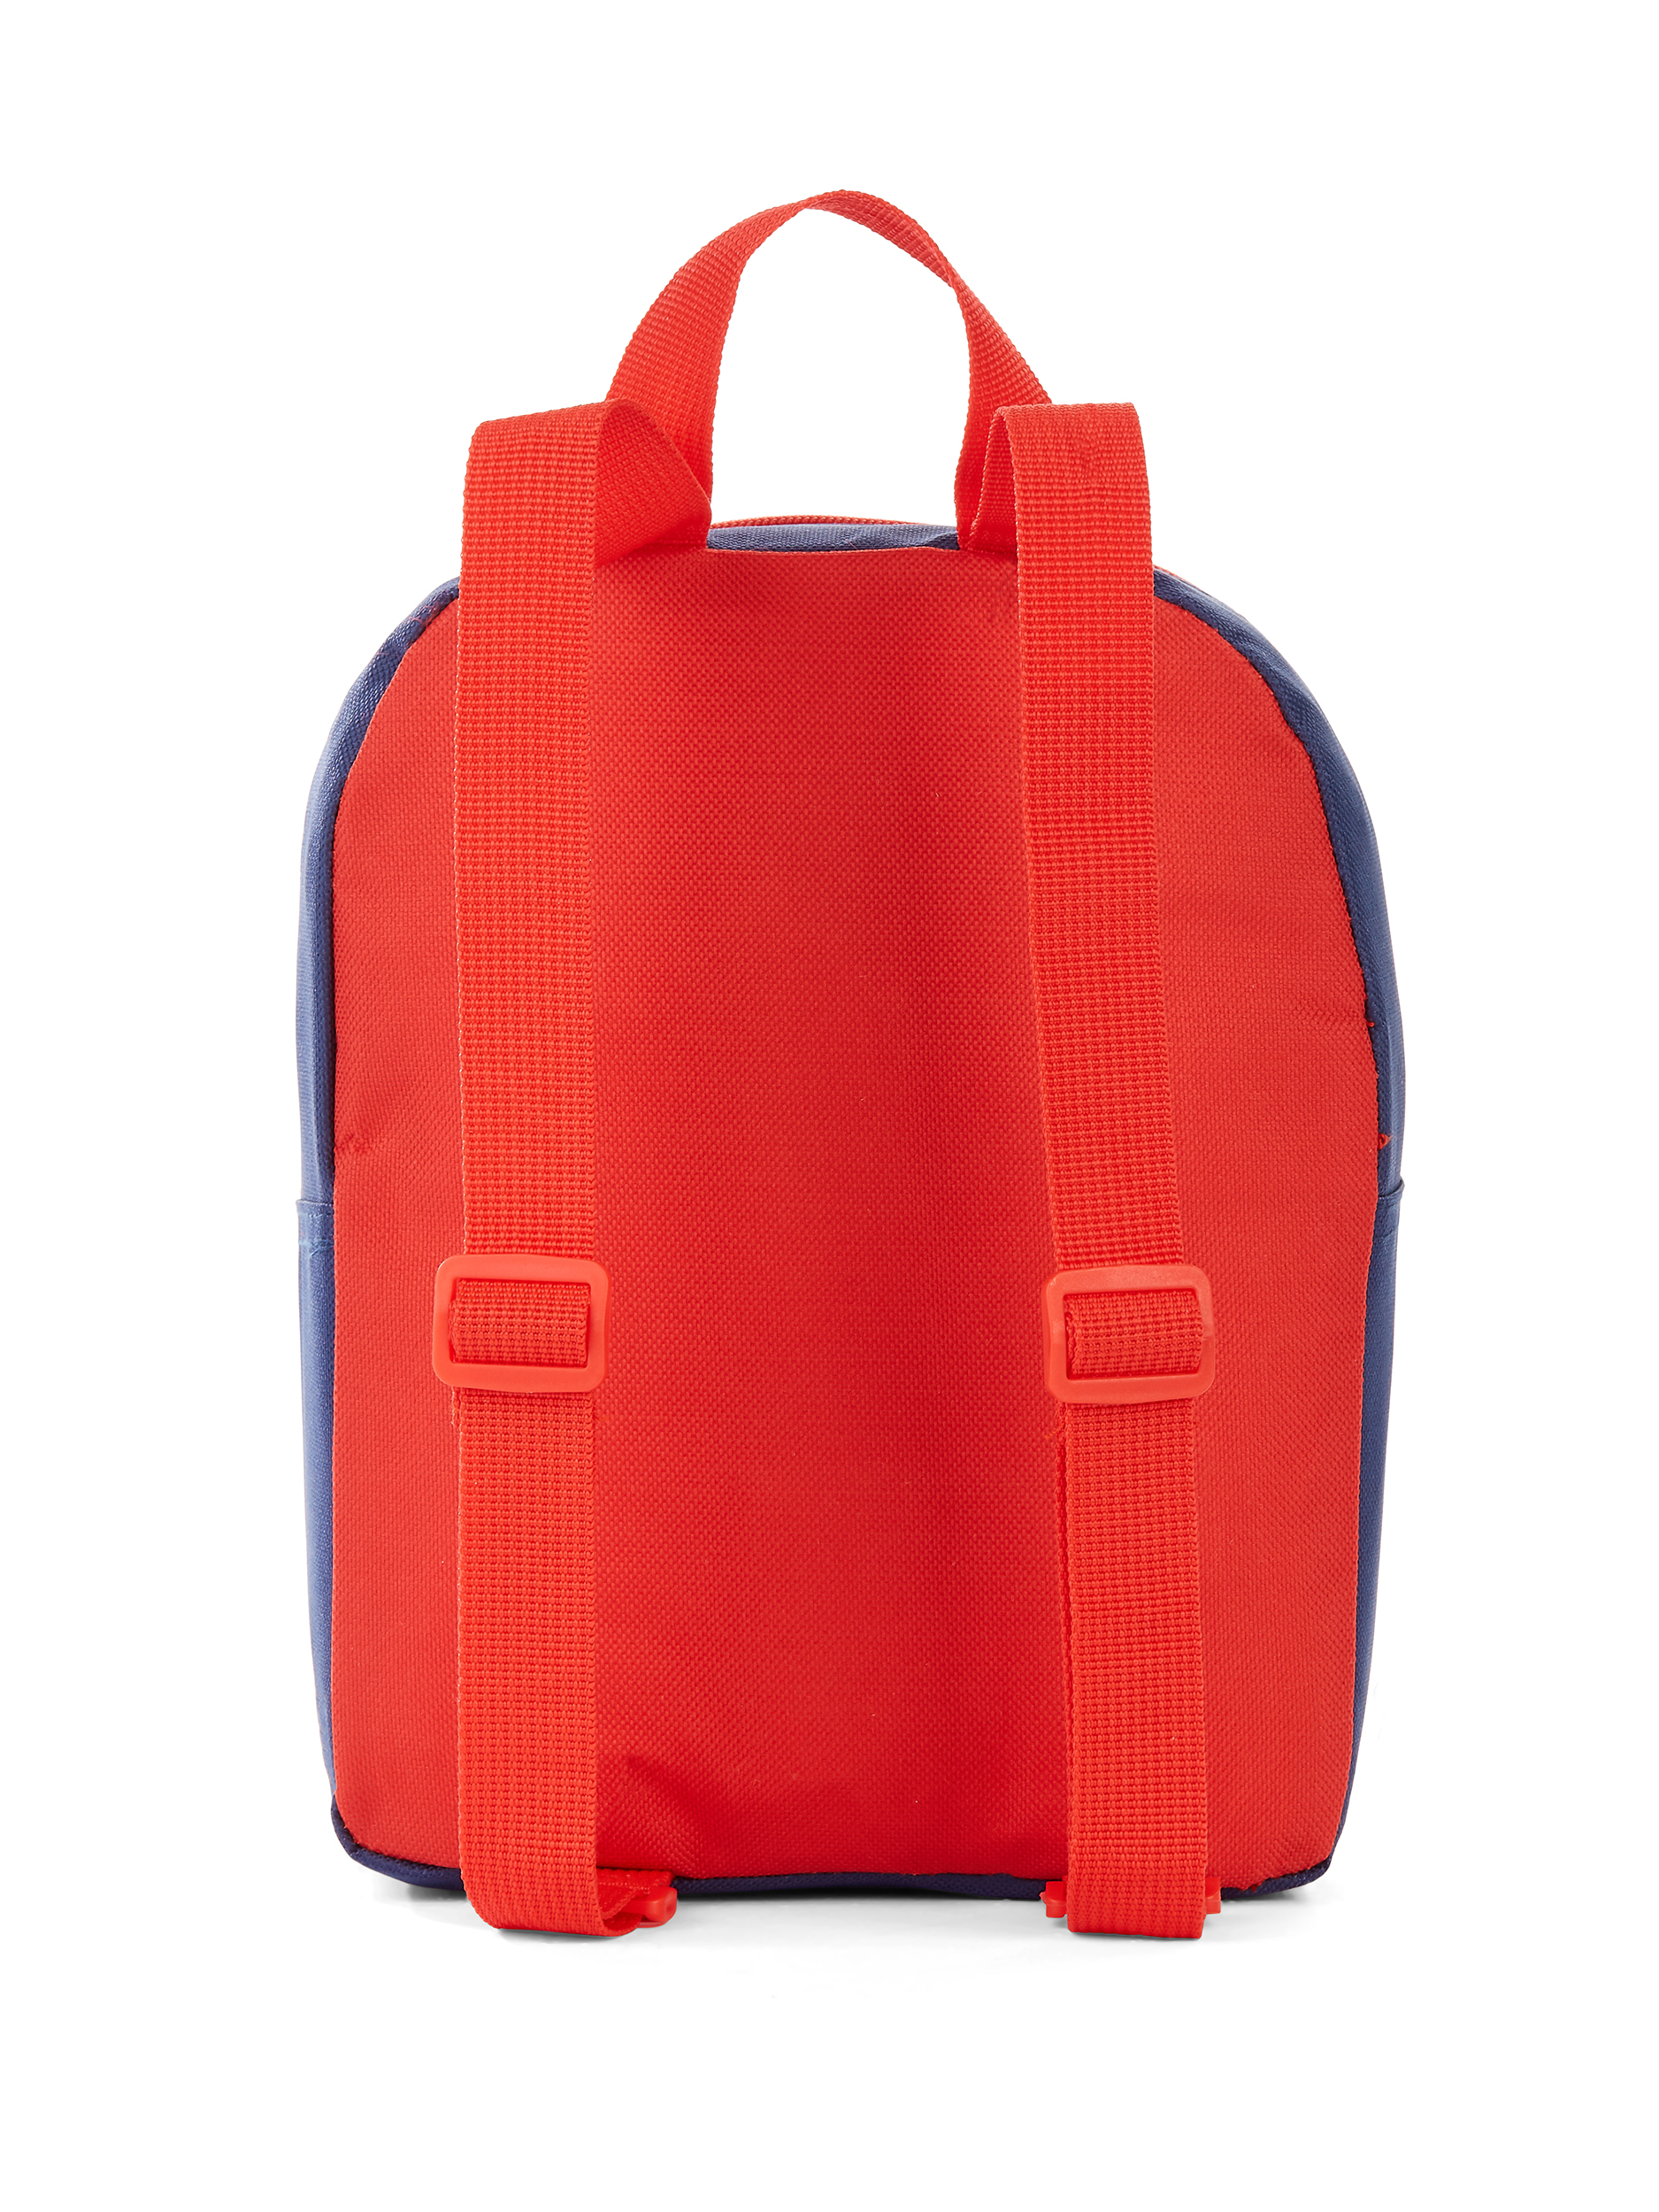 Carried Away Boys' 10" Fire Truck Backpack - image 2 of 4